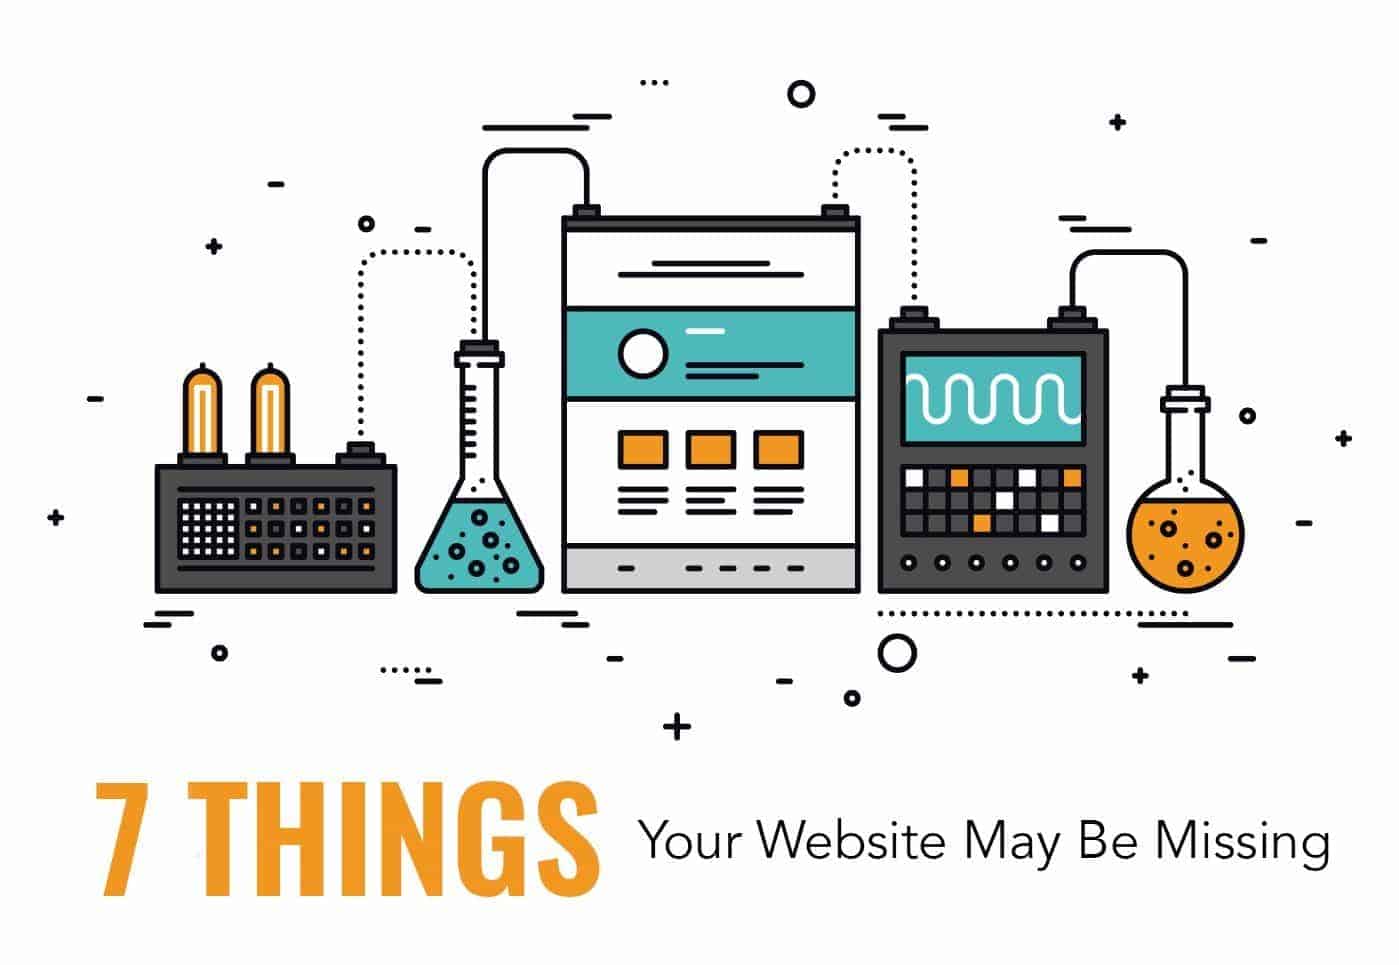 7 Things Your Website May Be Missing